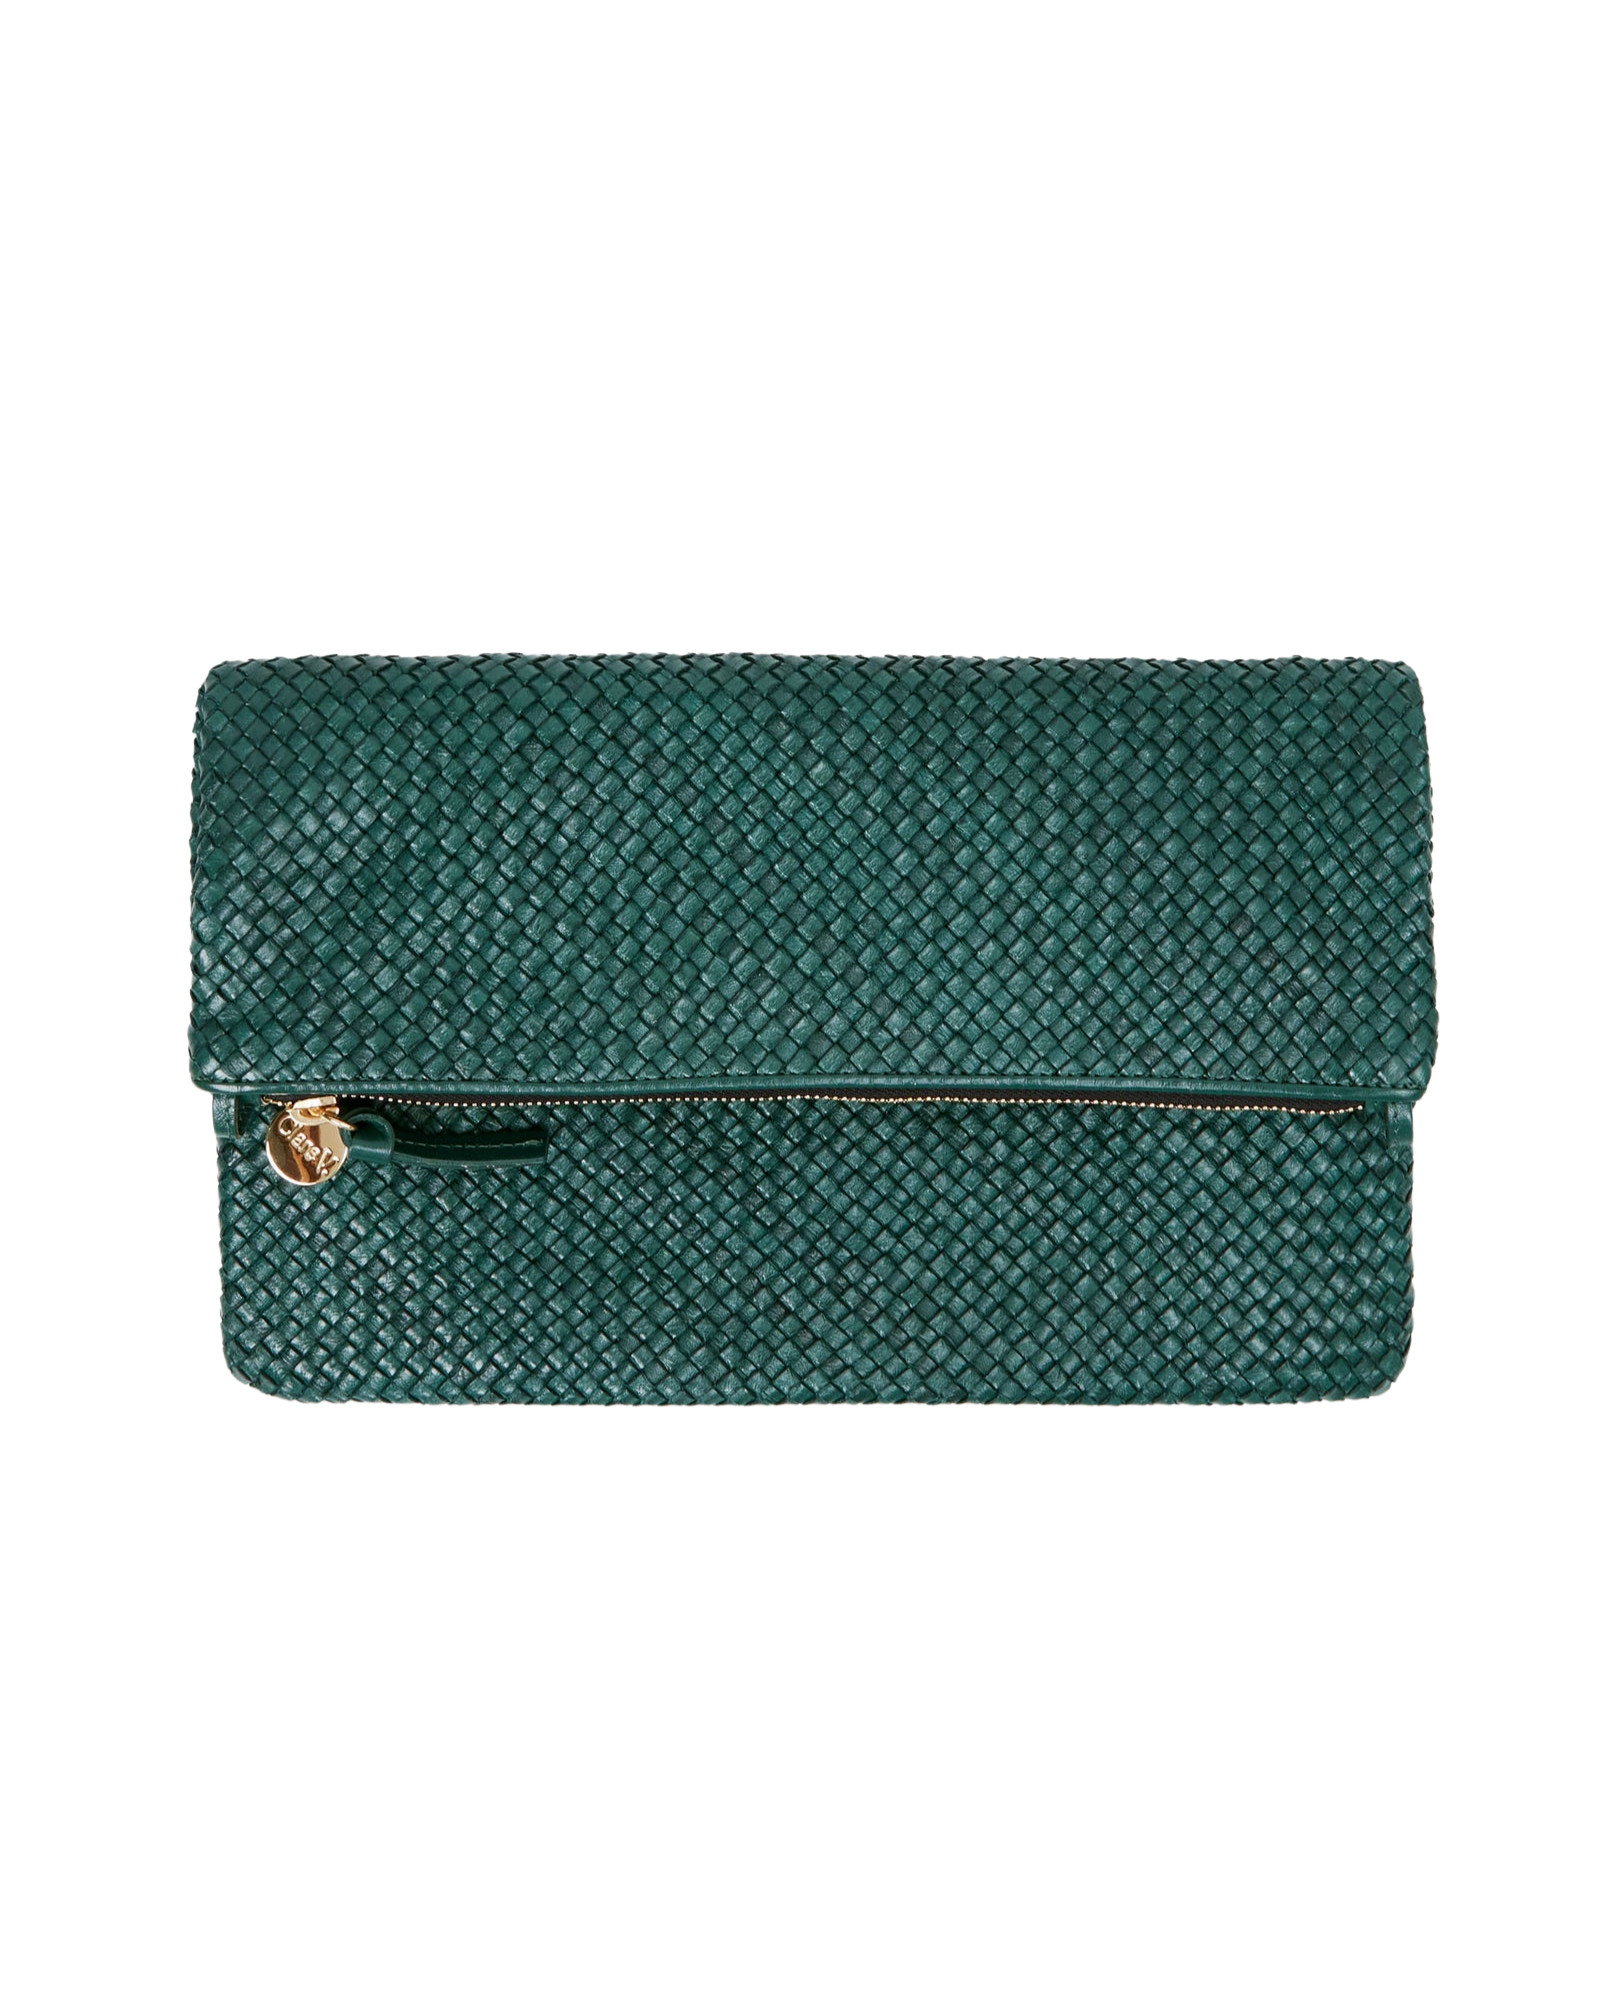 Clare V Clutch Bags for Women for sale